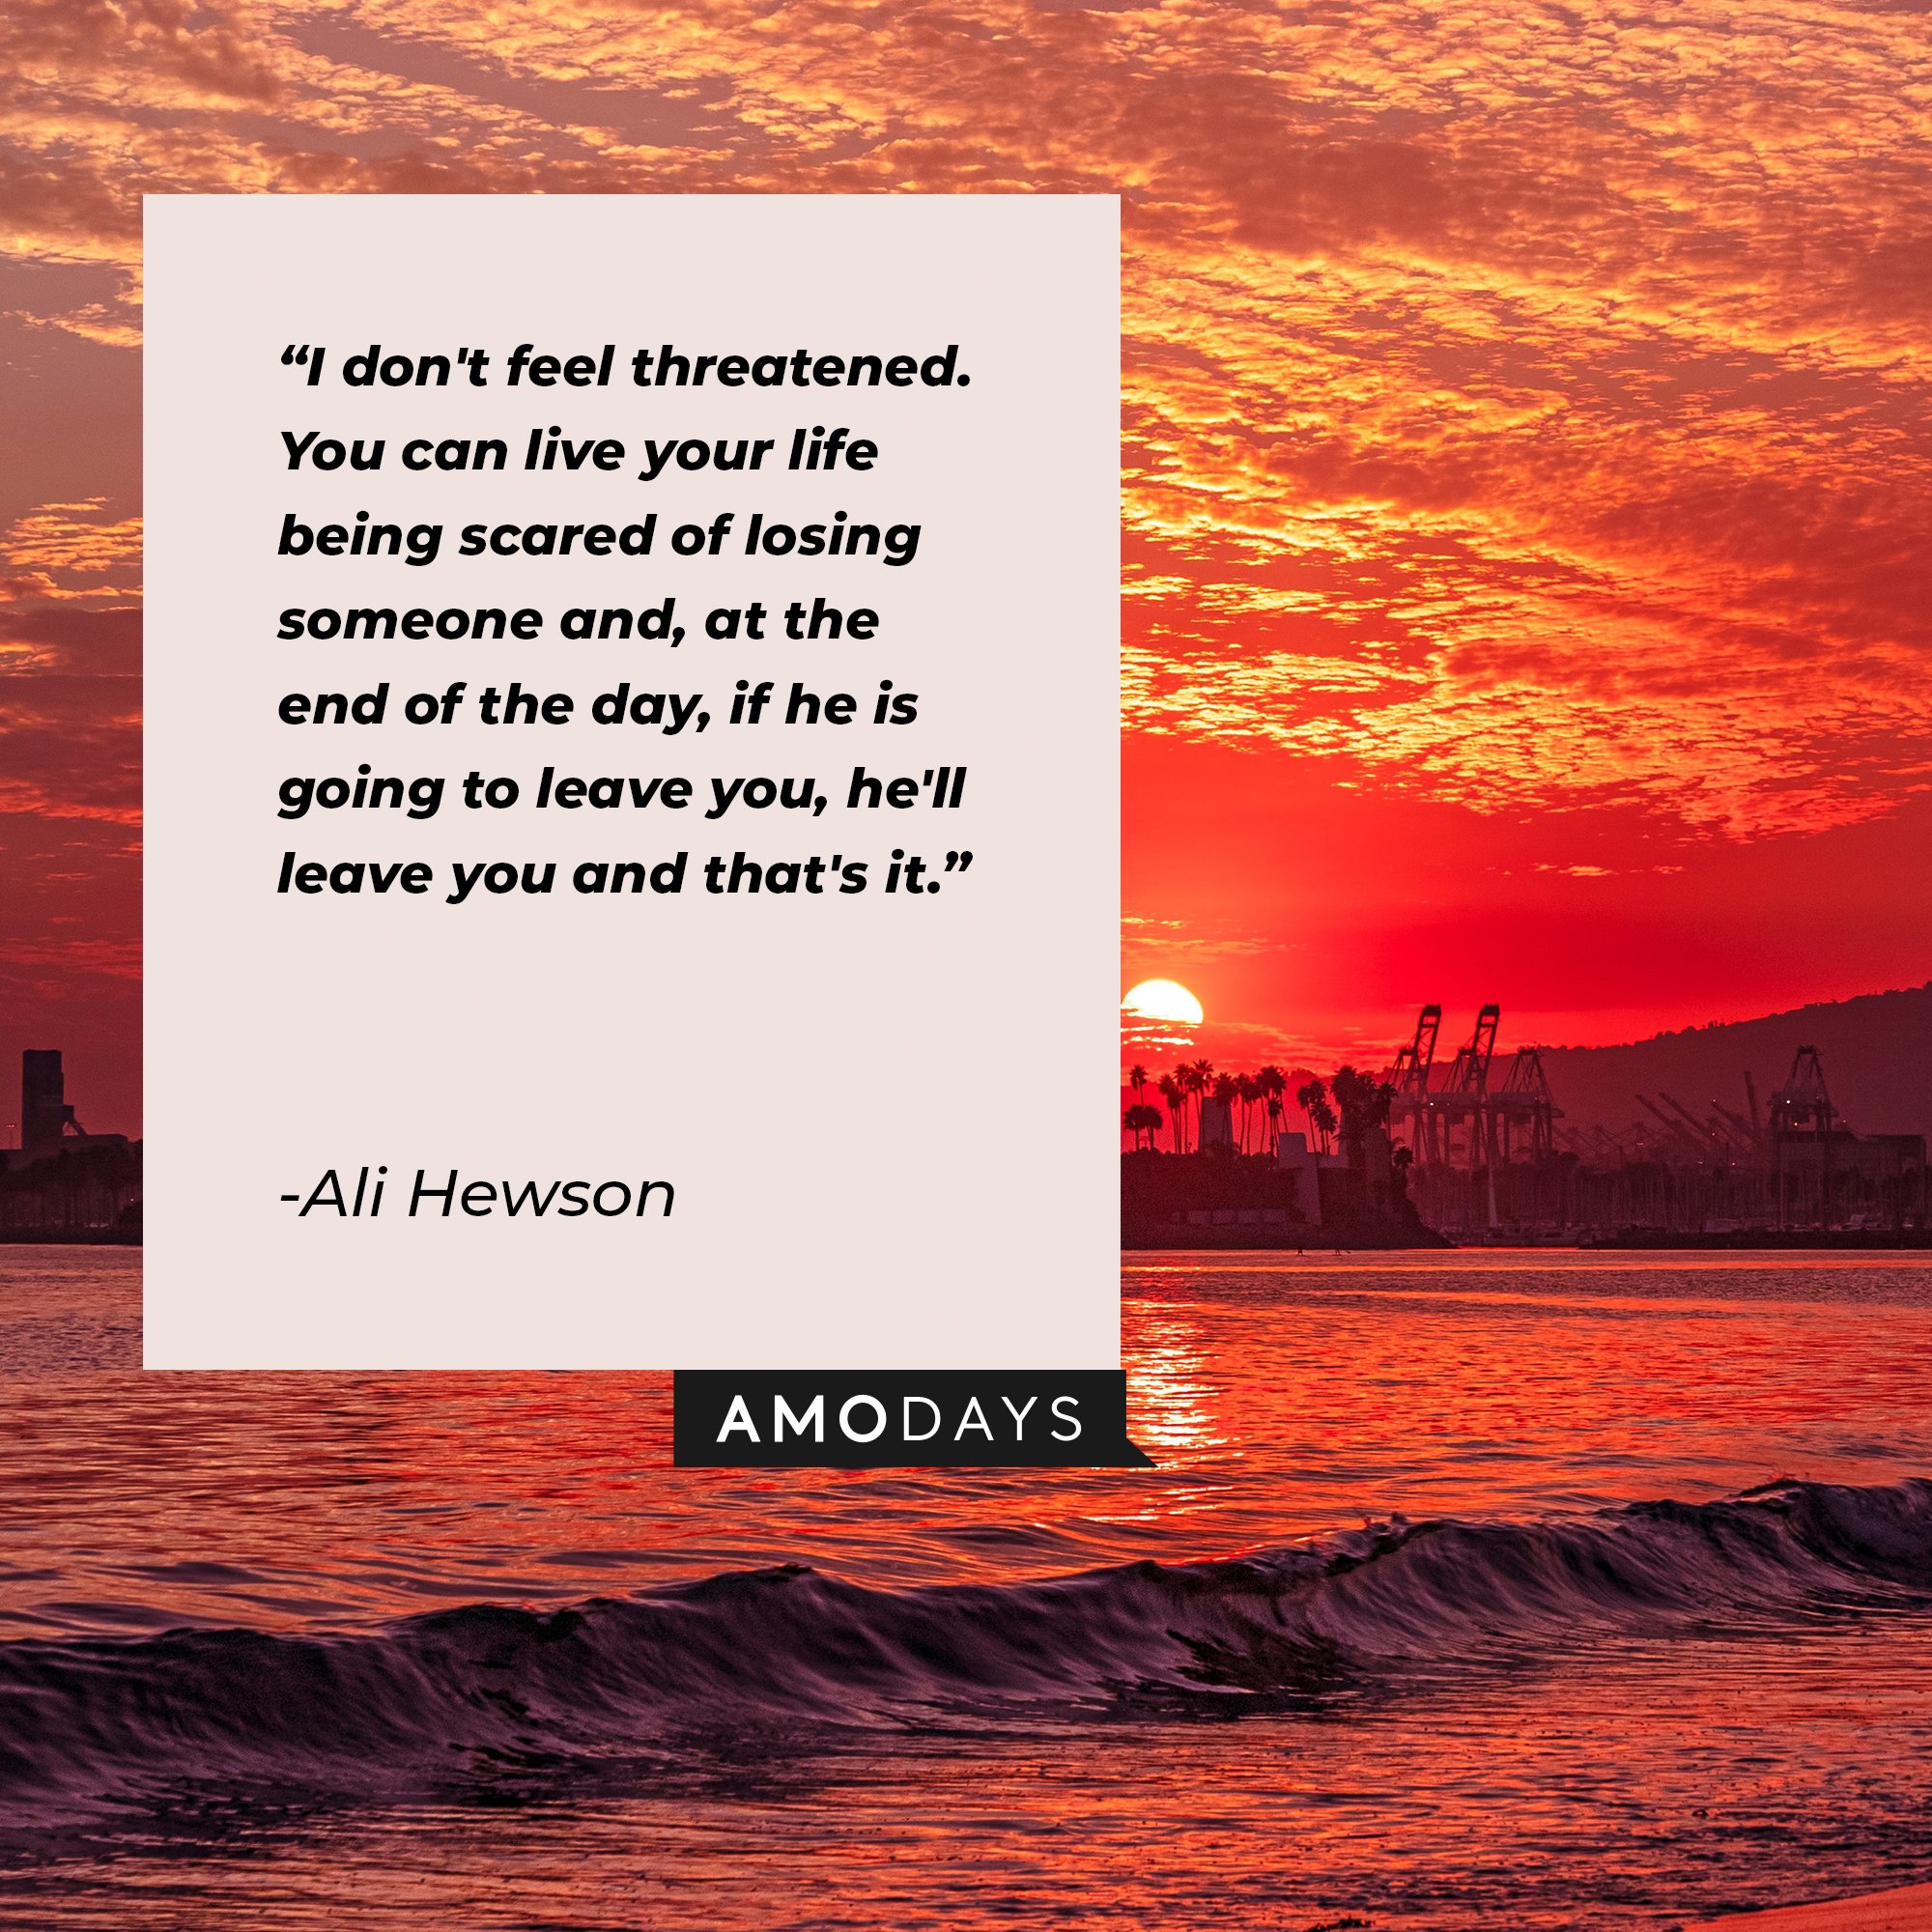  Ali Hewson’s quote: “I don't feel threatened. You can live your life being scared of losing someone and, at the end of the day, if he is going to leave you, he'll leave you, and that's it." | Image: AmoDays